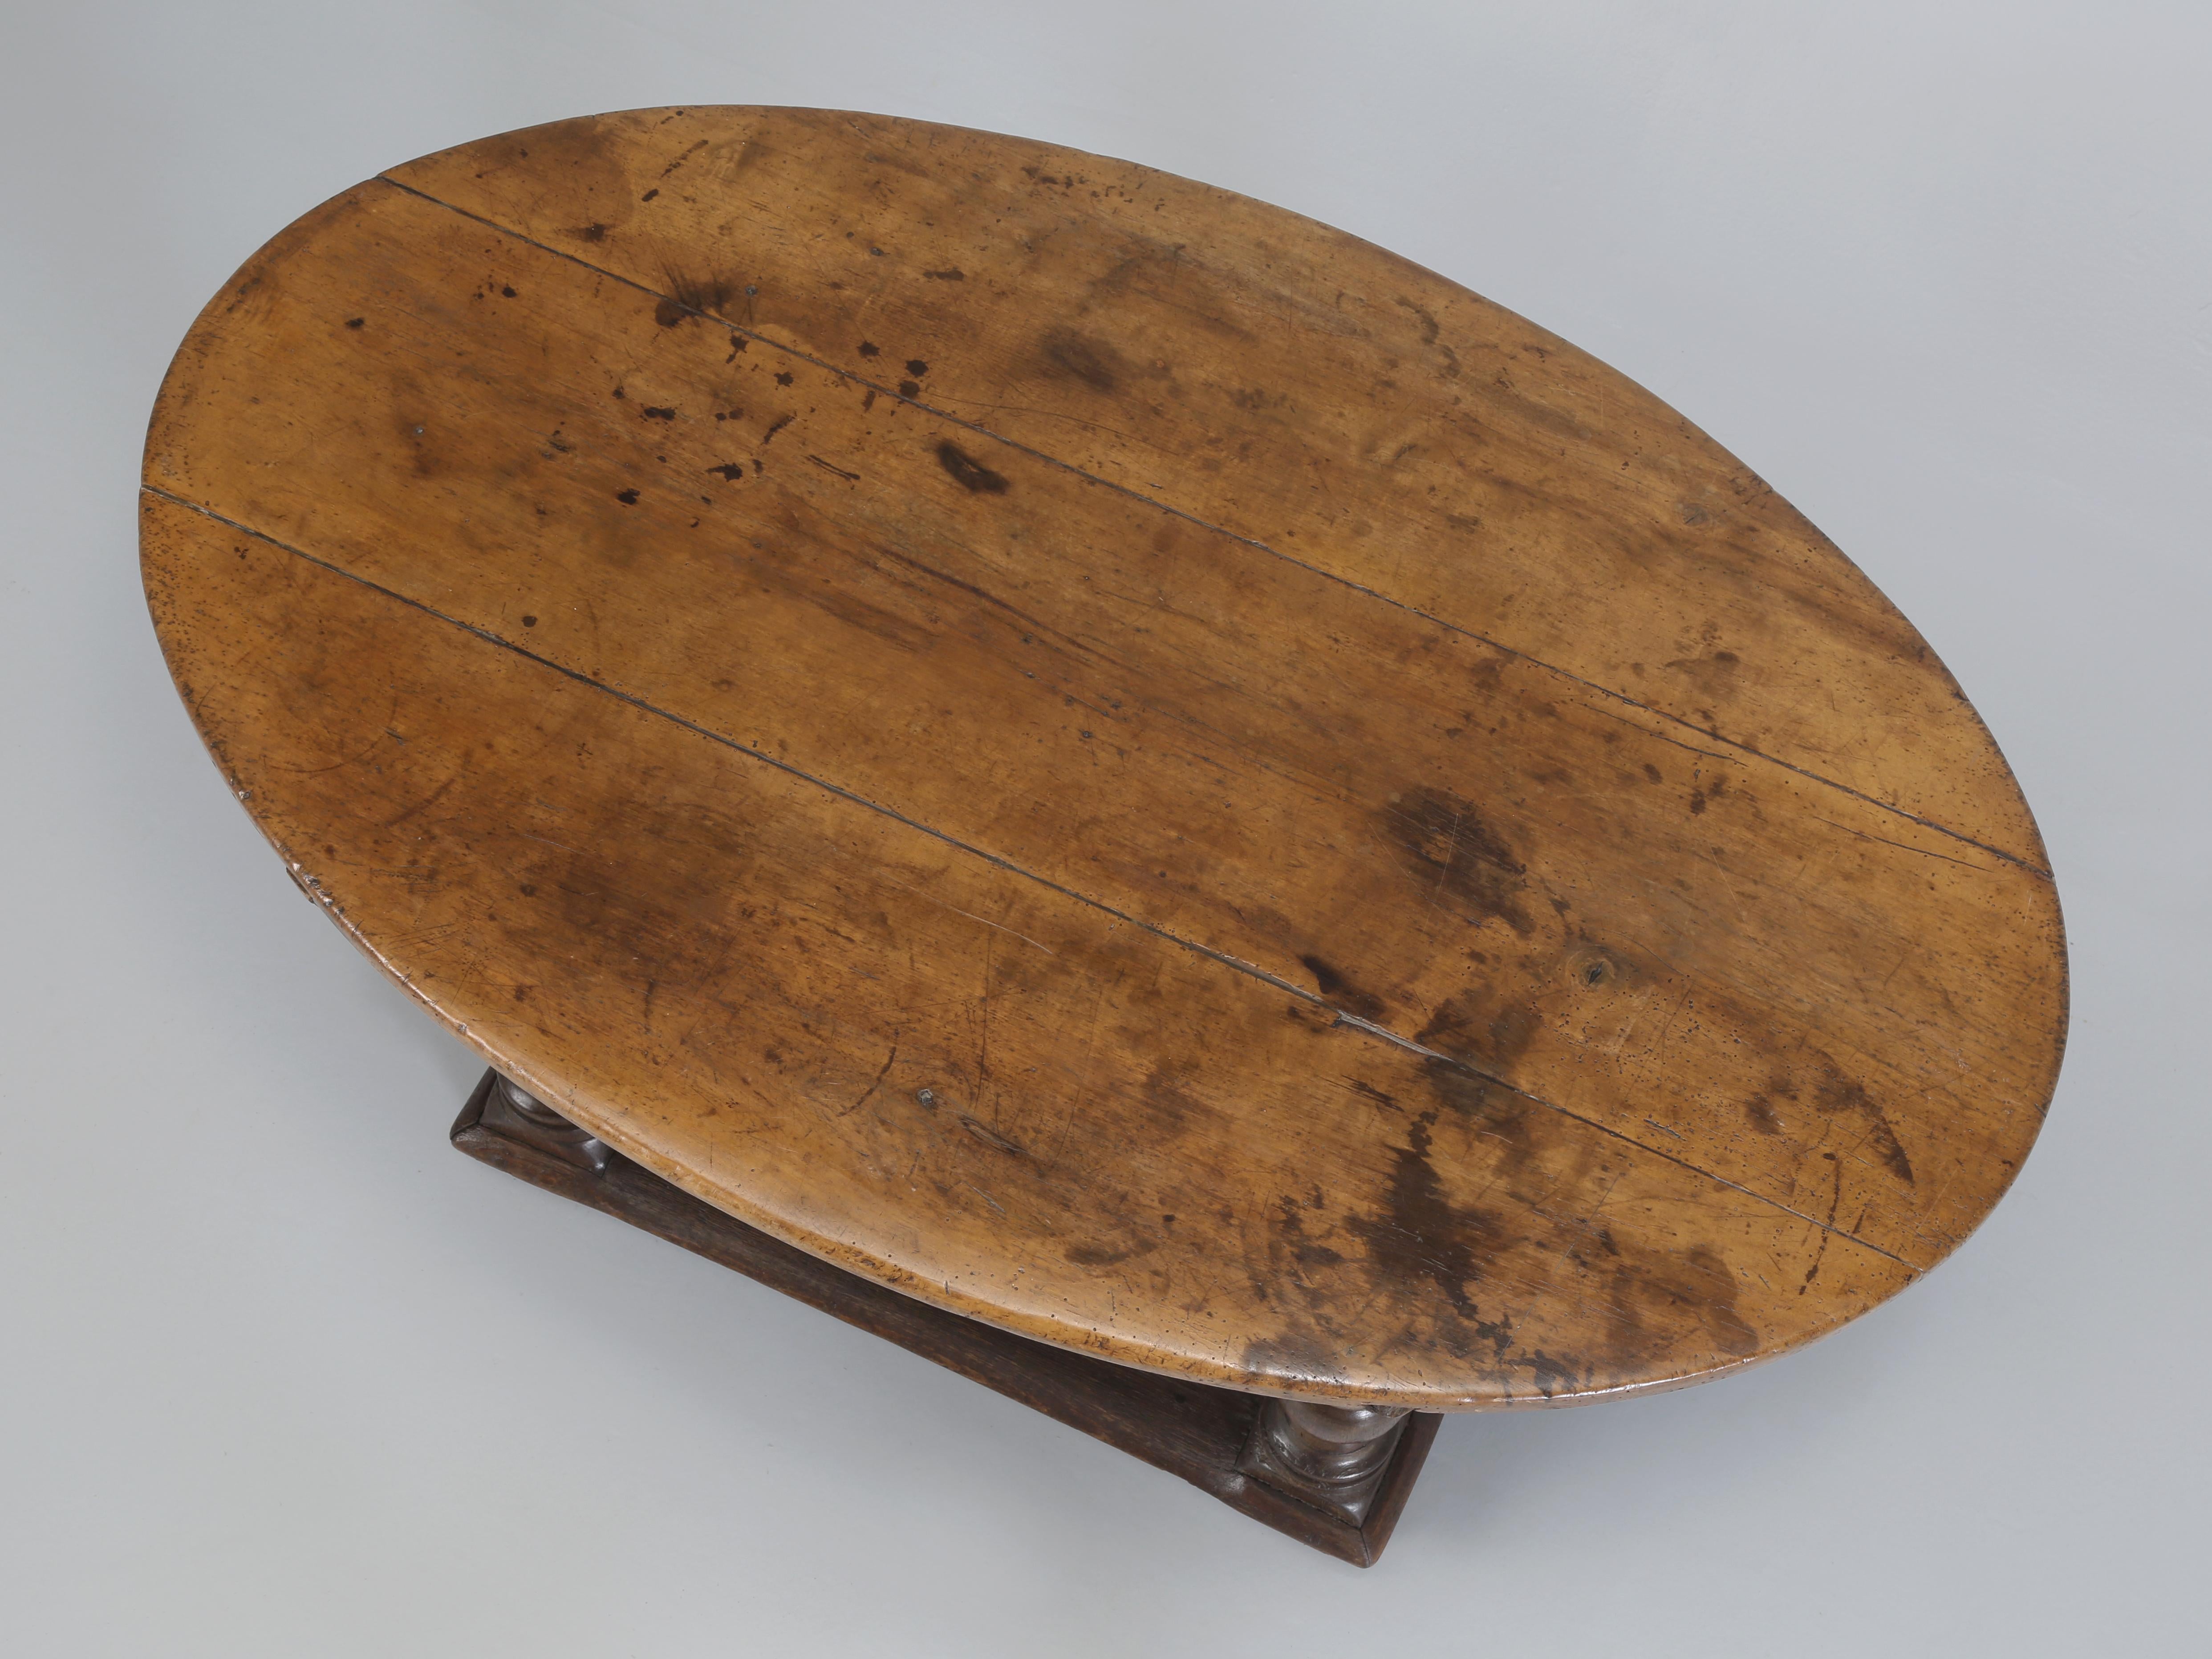 Antique French Oval Walnut Coffee Table or Tea Table that was hand-made during the 1700's and enjoys an unbelievable all original patina that words simply cannot do justice to. The height of this Antique Oval Walnut Coffee Table enables it to be